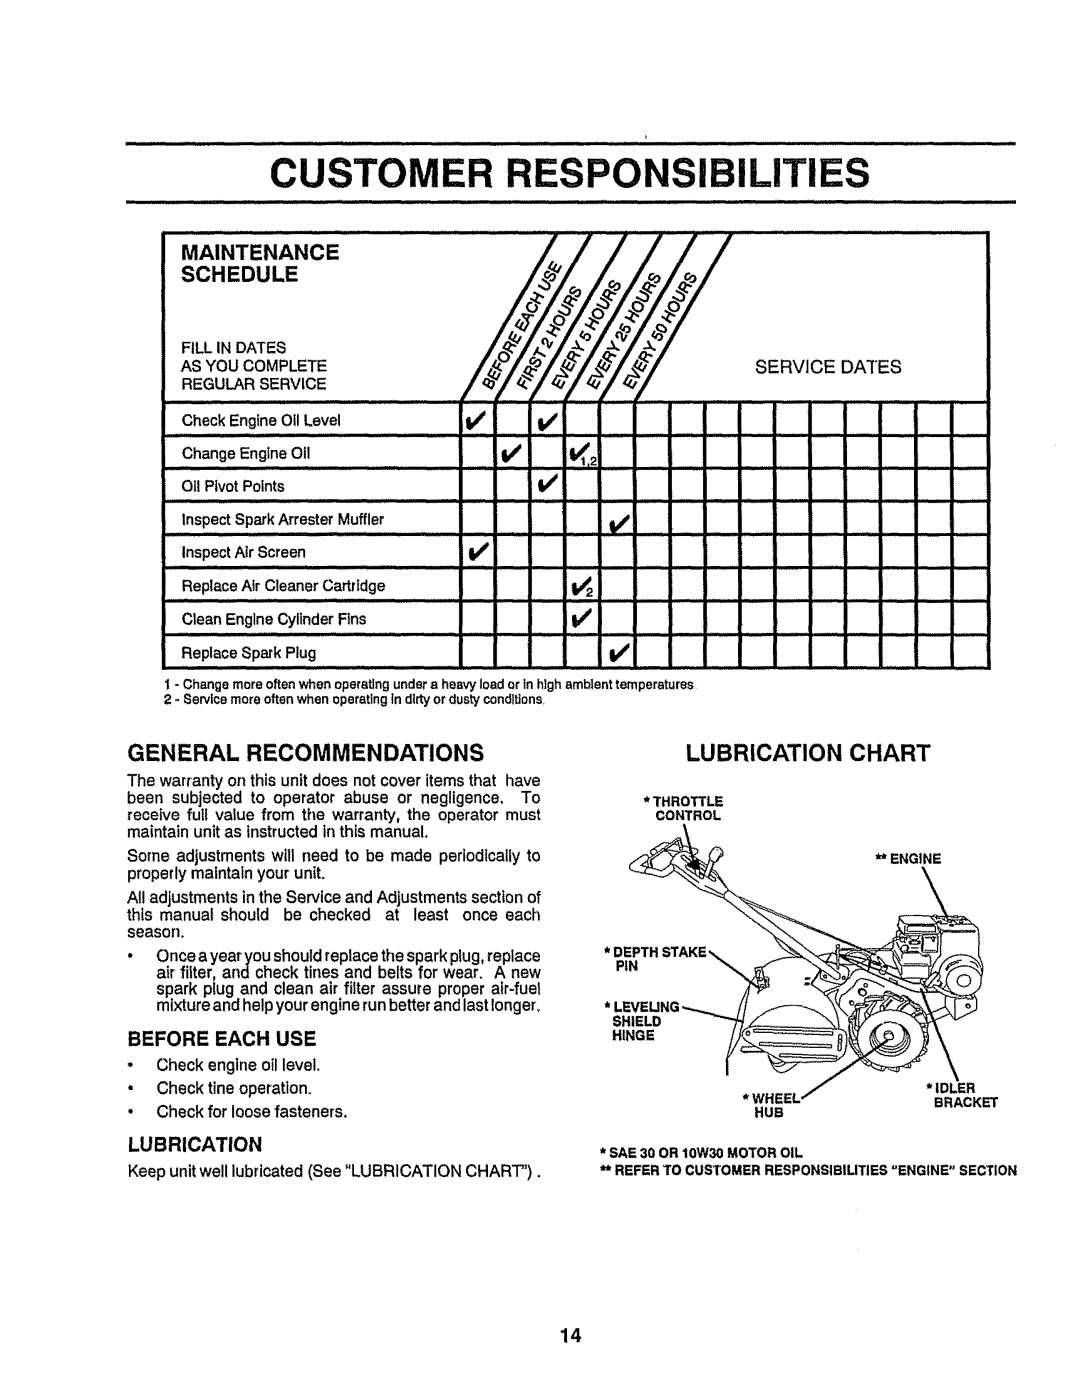 Craftsman 917-299751 owner manual Customer Responsibilities, Lubrication Chart, General Recommendations, Before Each Use 